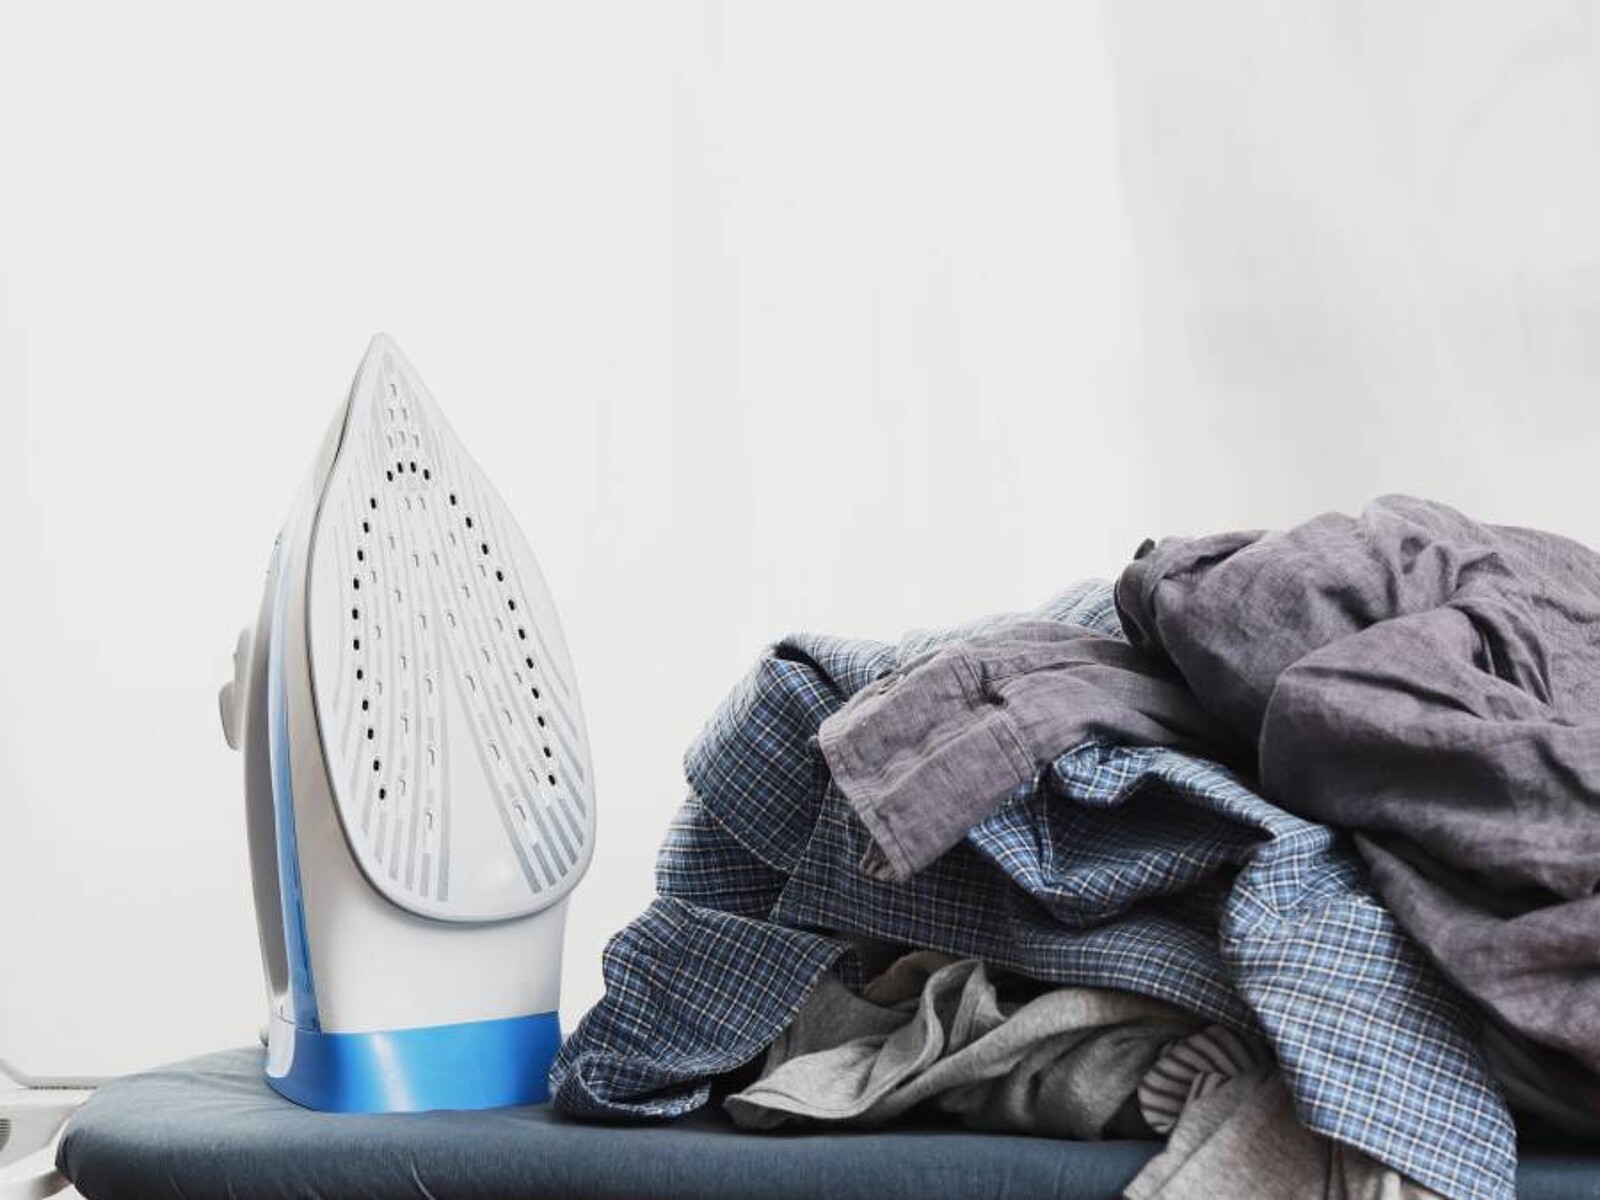 Ironing tips to keep your clothes looking their best